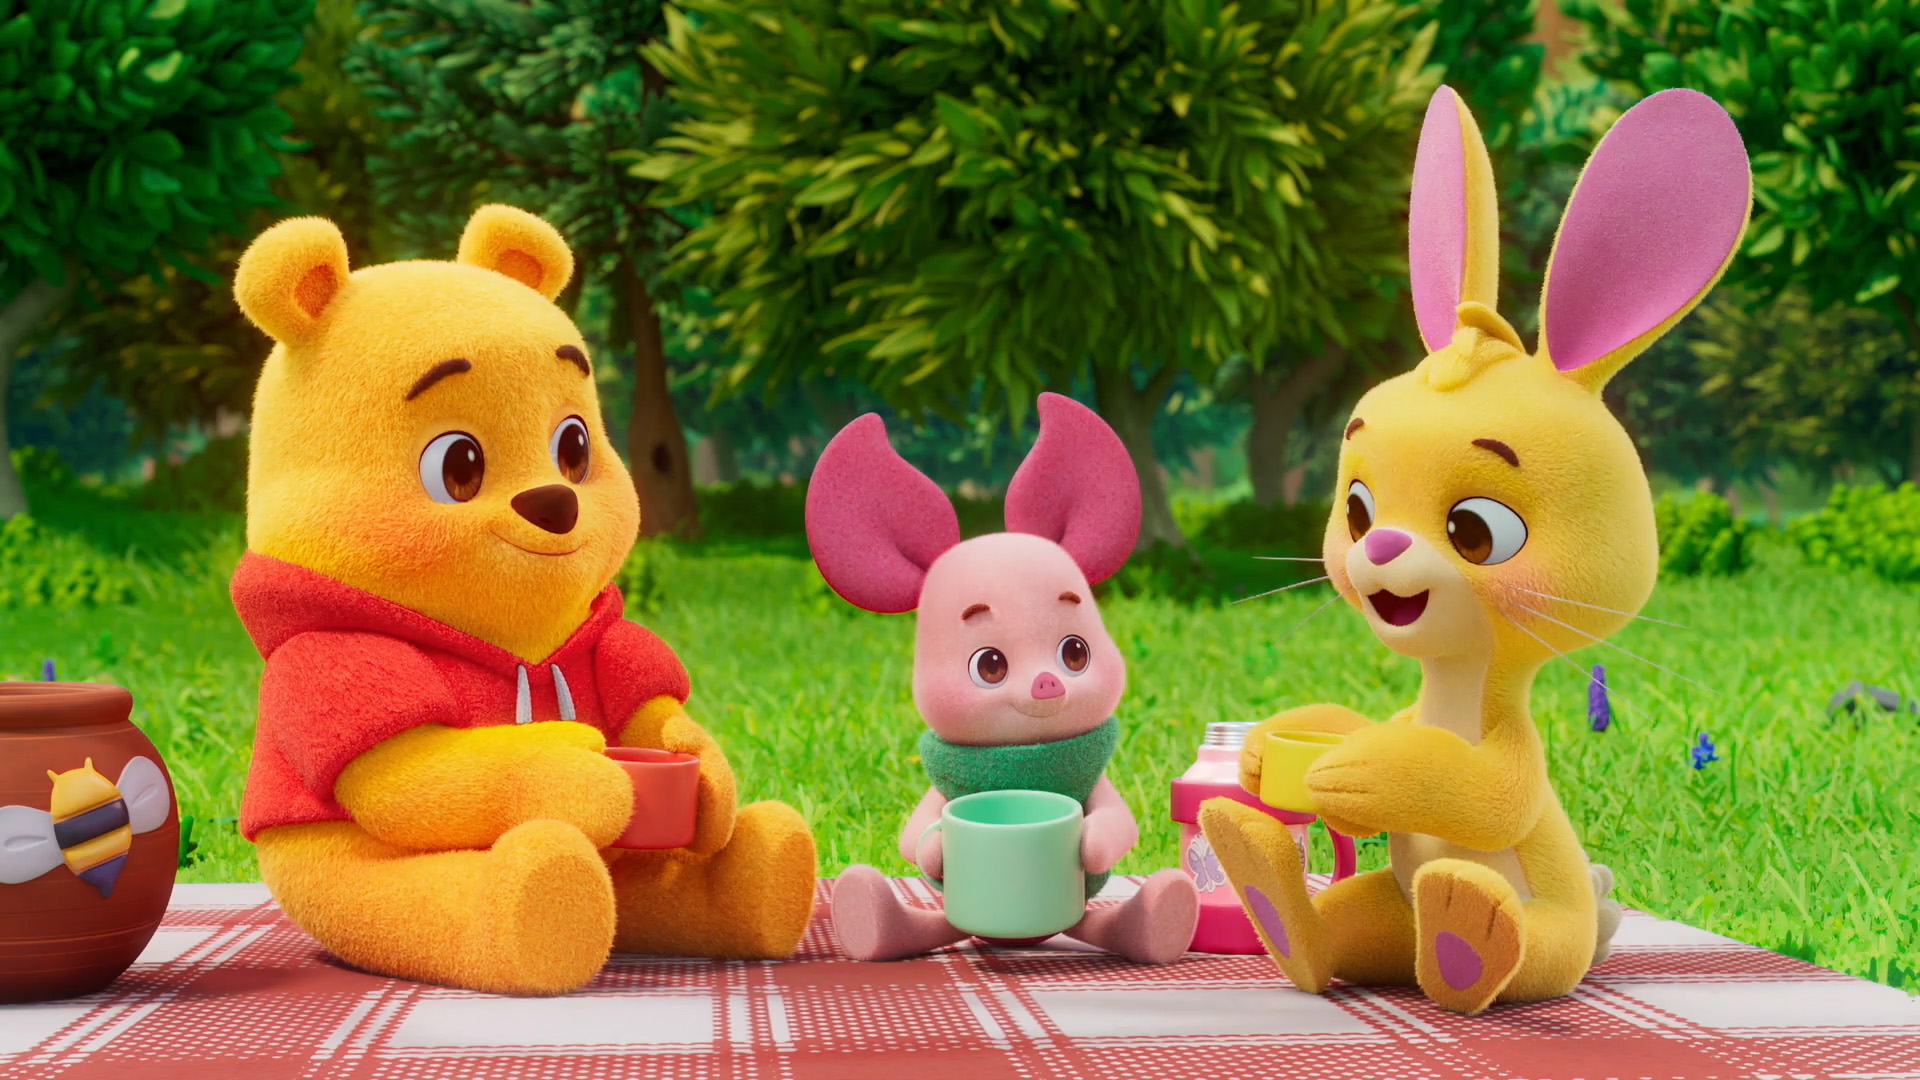 New Episode of ‘Playdate with Winnie the Pooh’ Premieres on National Winnie the Pooh Day